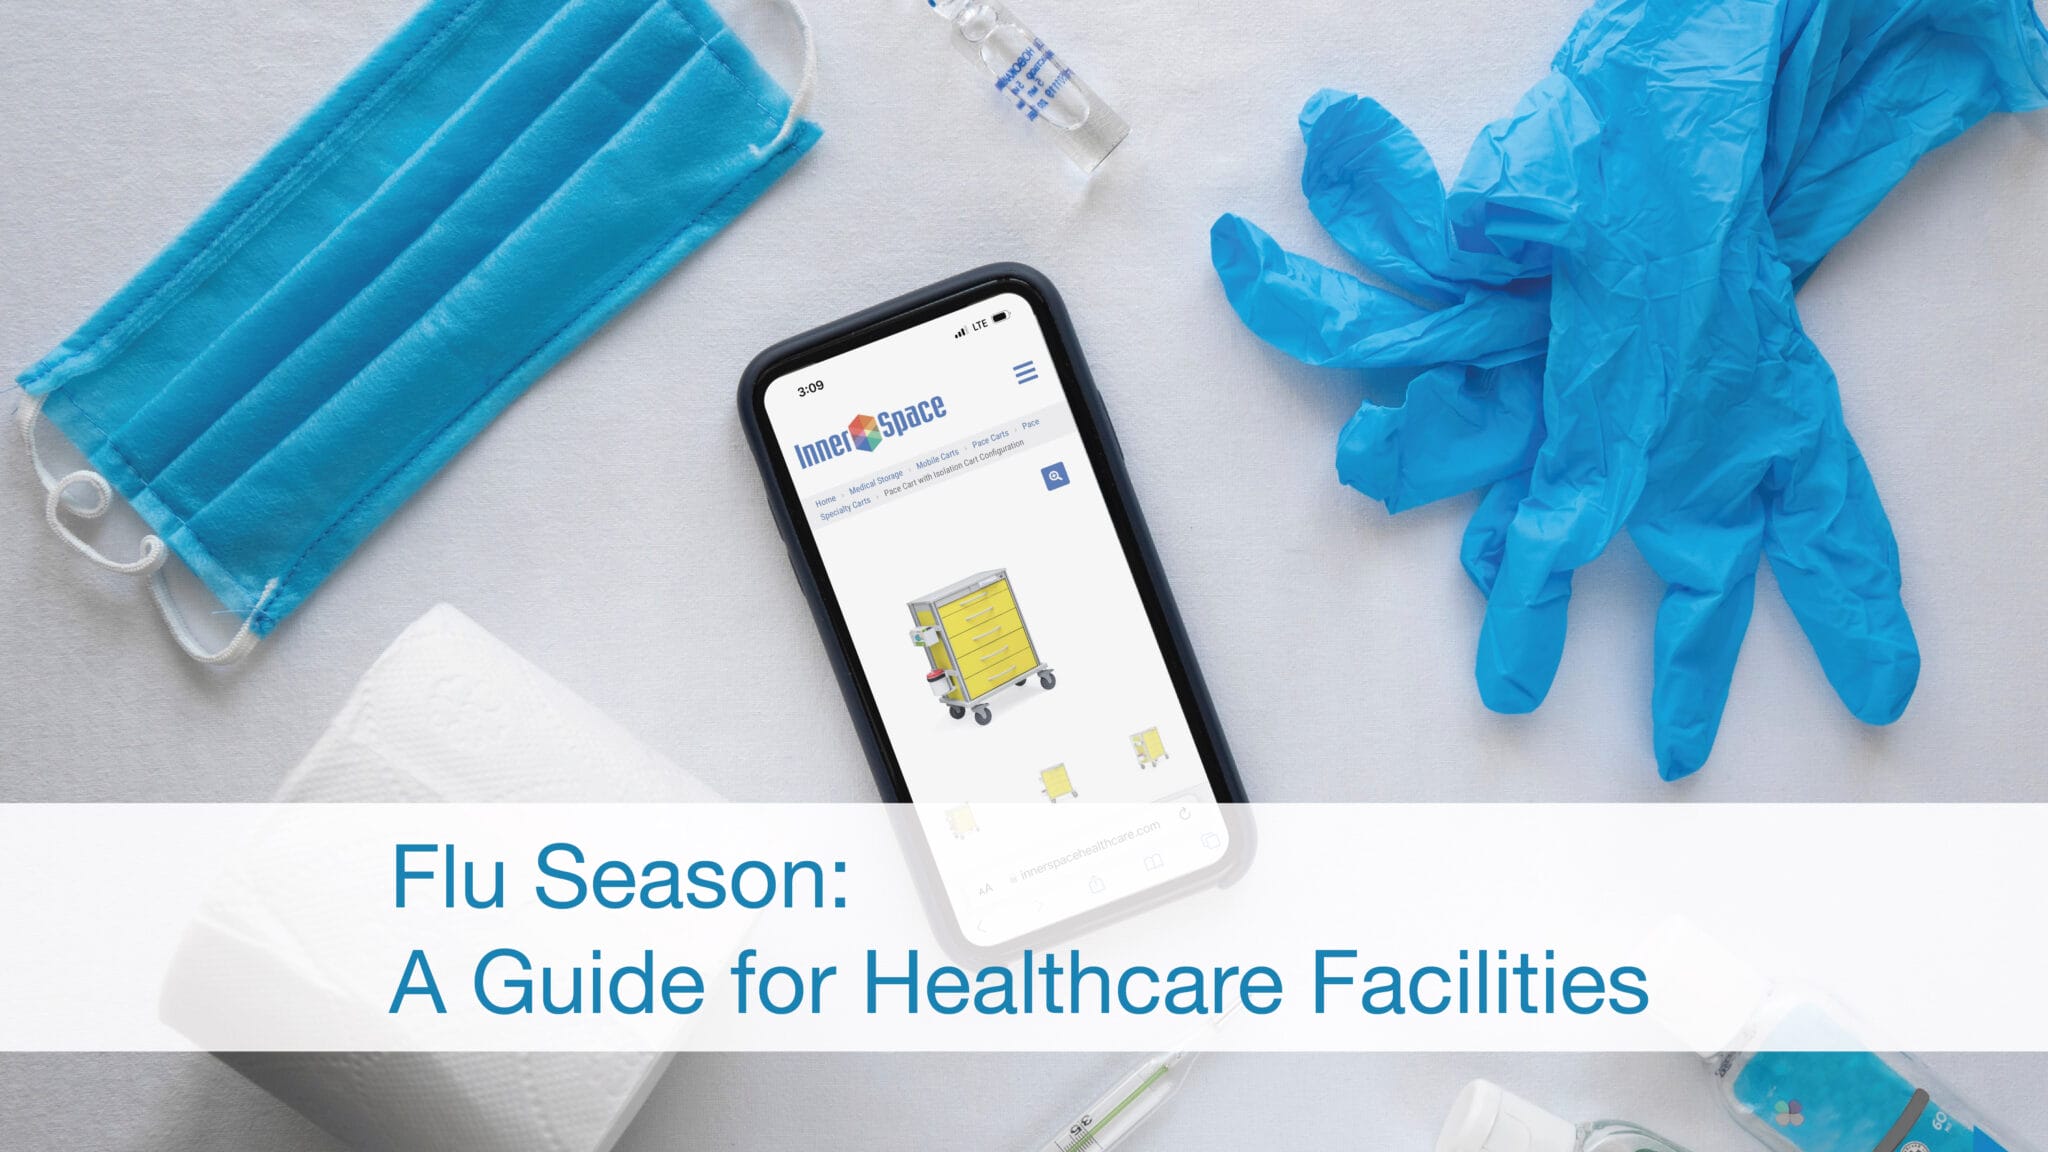 Main image for flu season healthcare facility guide with gloves and a mobile phone